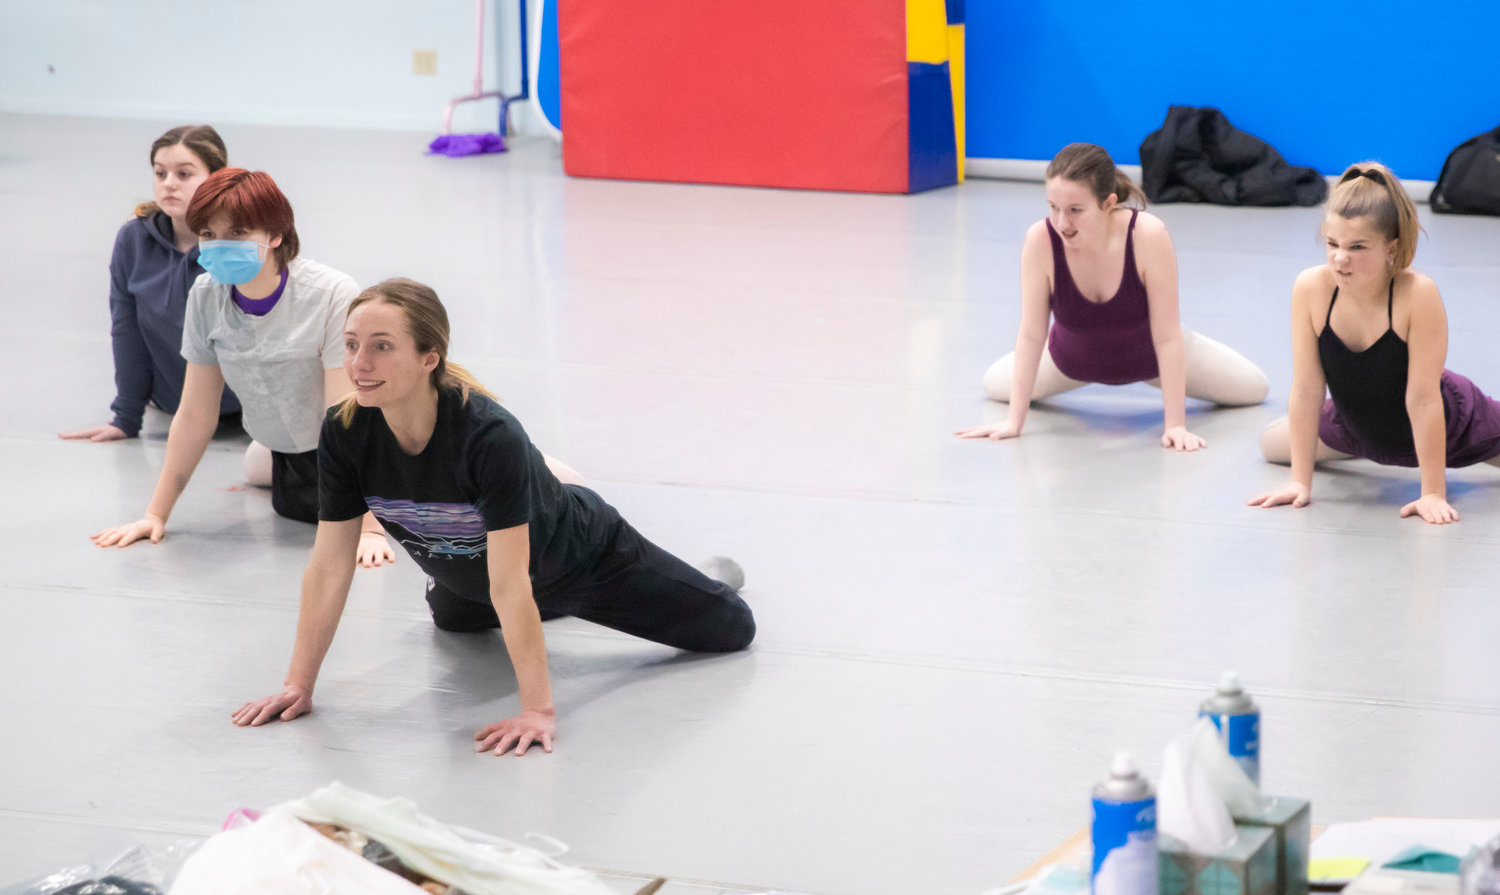 Briana Jones, an instructor at the Southwest Washington Dance Center in Chehalis, stretches with students while preparing for upcoming performances during a class on Thursday.